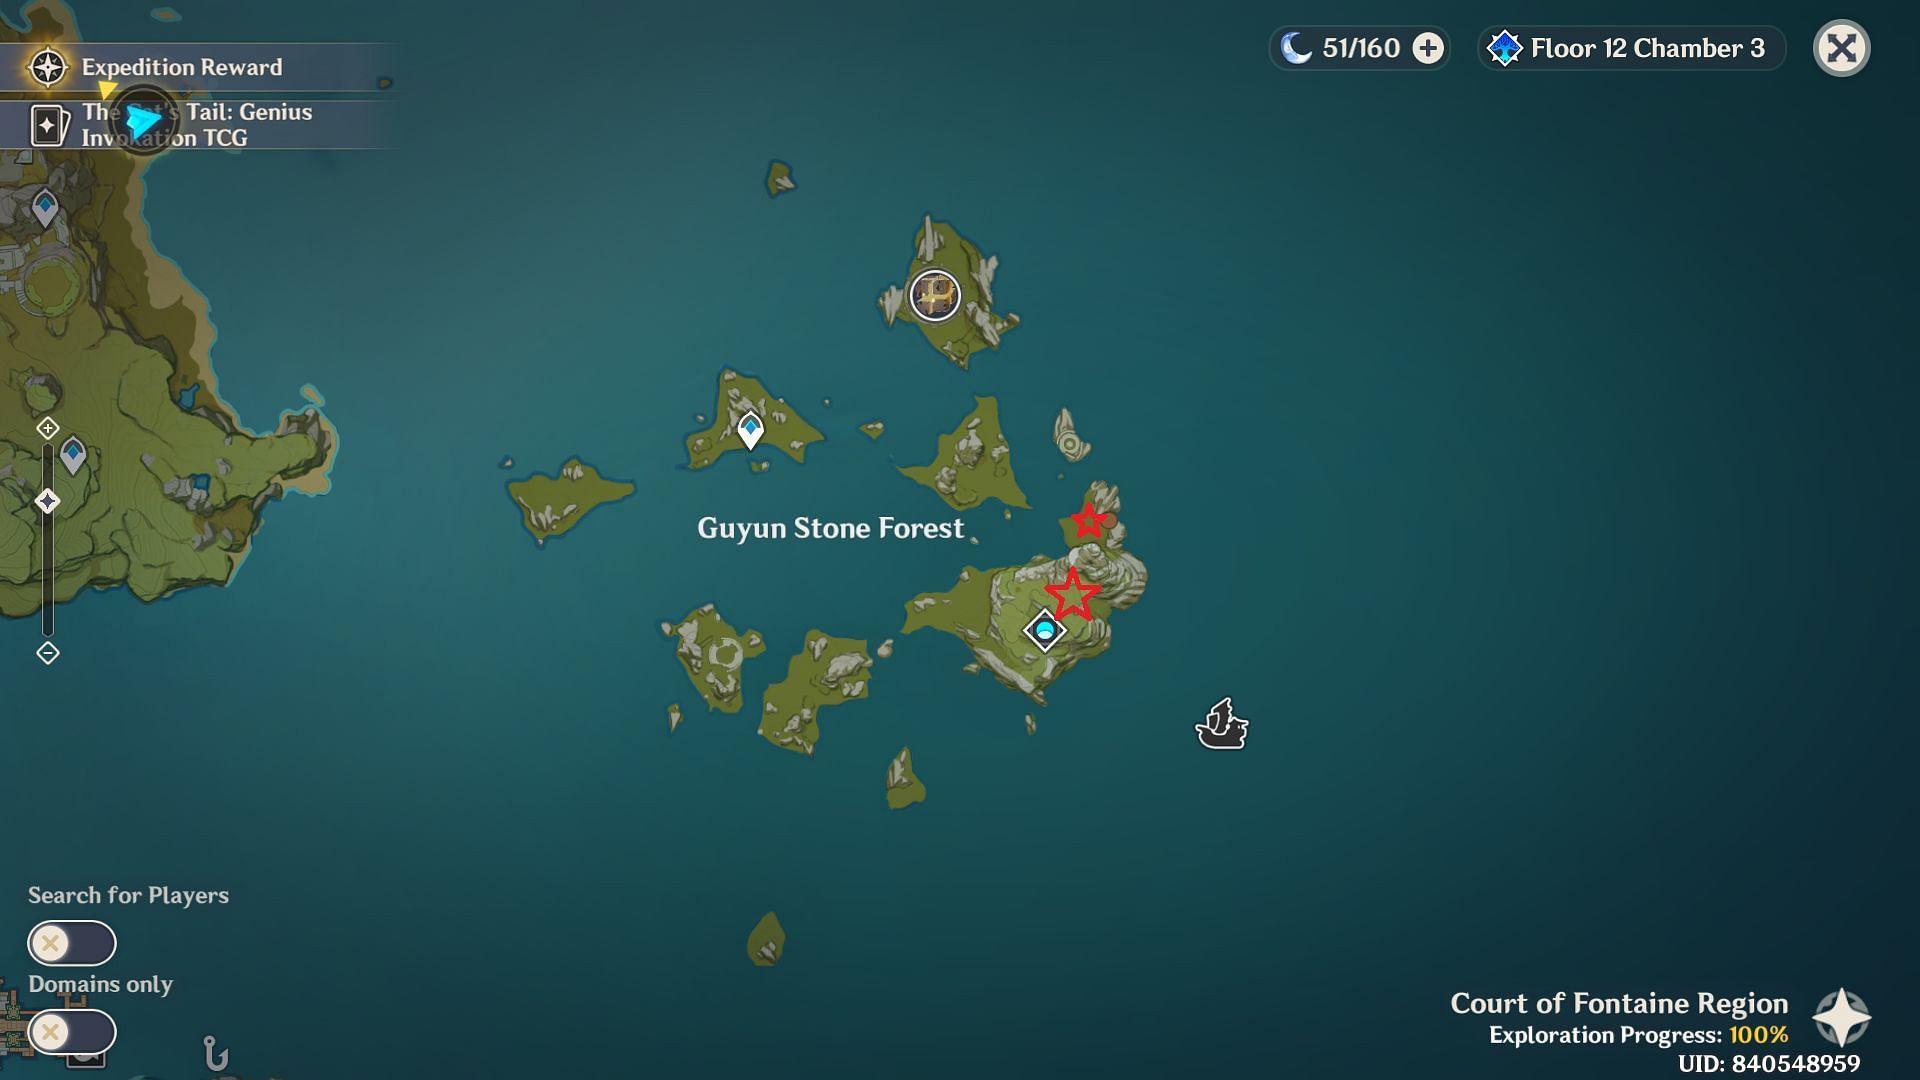 Abyss Mage locations in Guyun Stone Forest. (Image via HoYoverse)